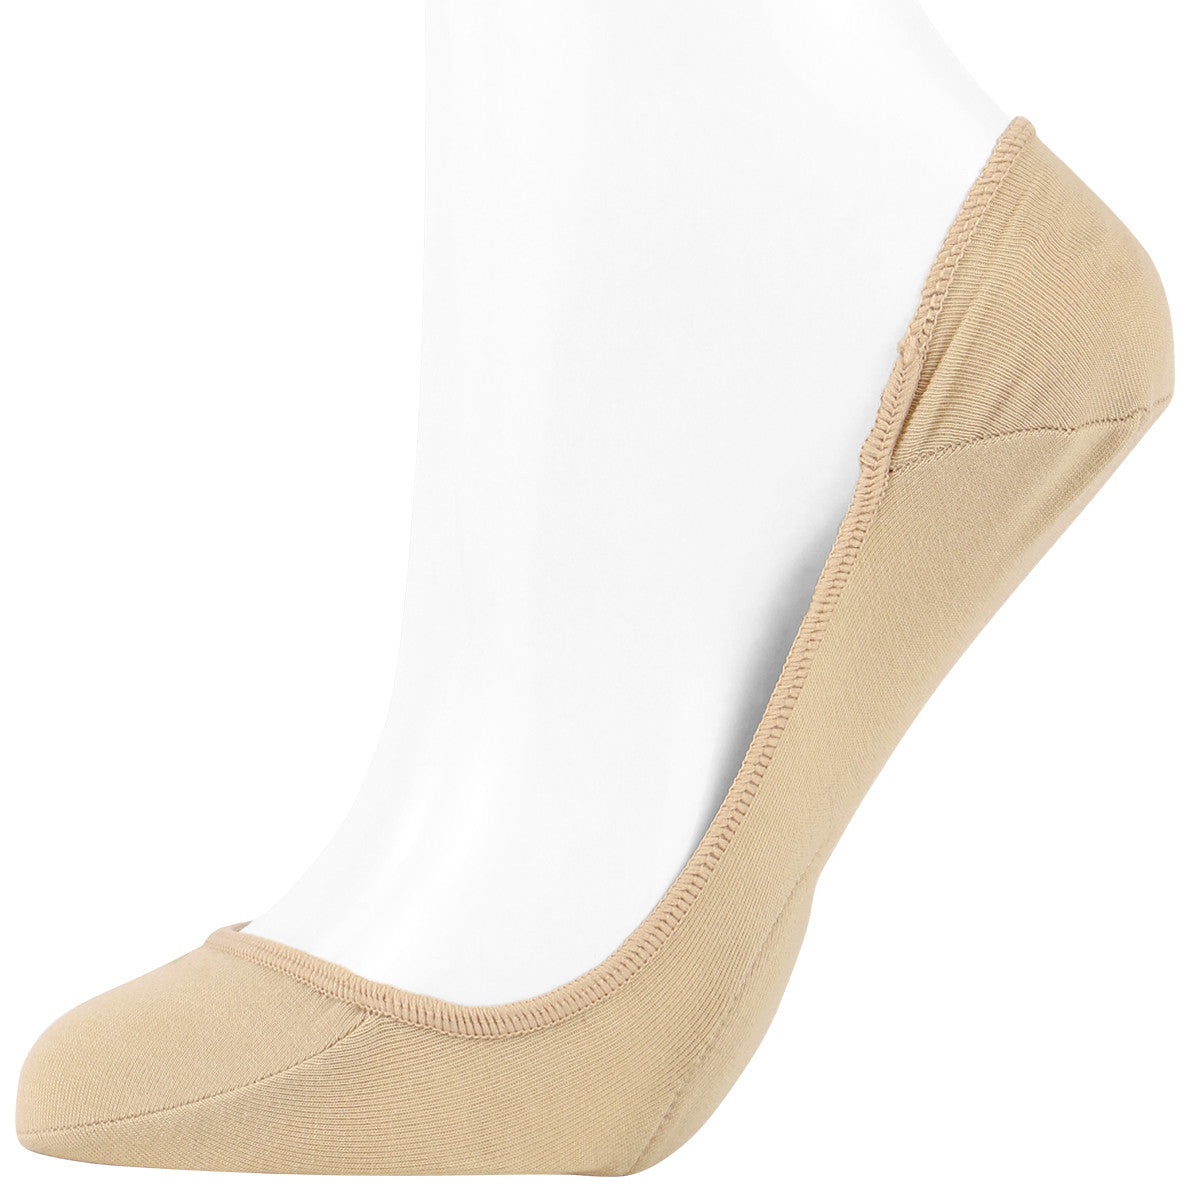 Cushioned Arch Support Pad No Show Socks | Beige or Black - CHERRYSTONEstyle